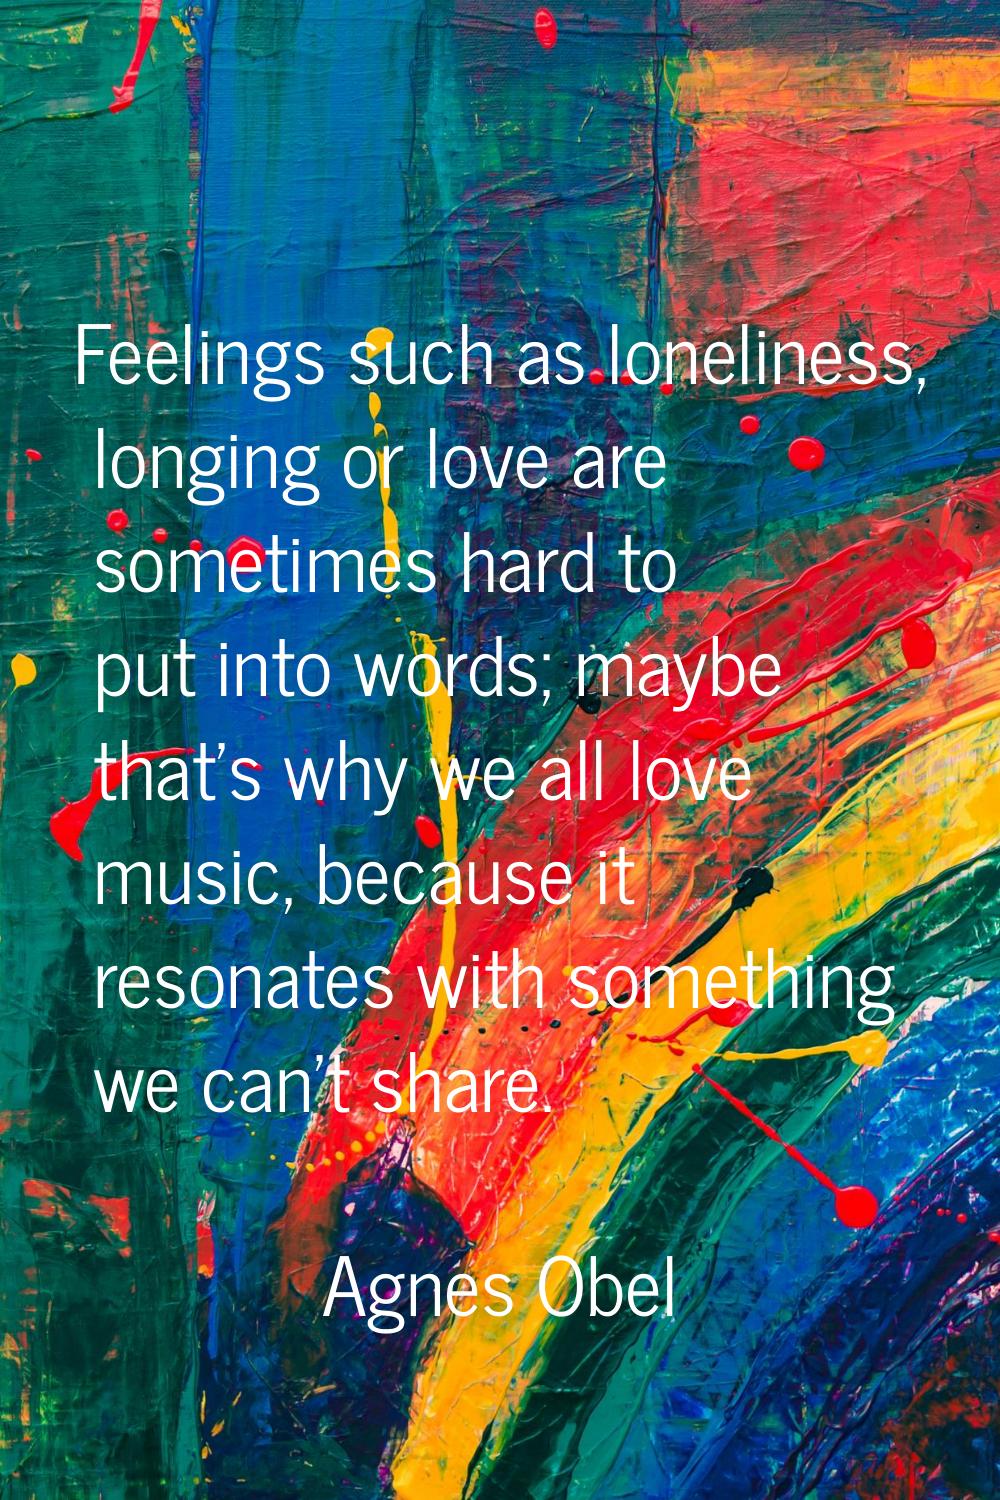 Feelings such as loneliness, longing or love are sometimes hard to put into words; maybe that's why